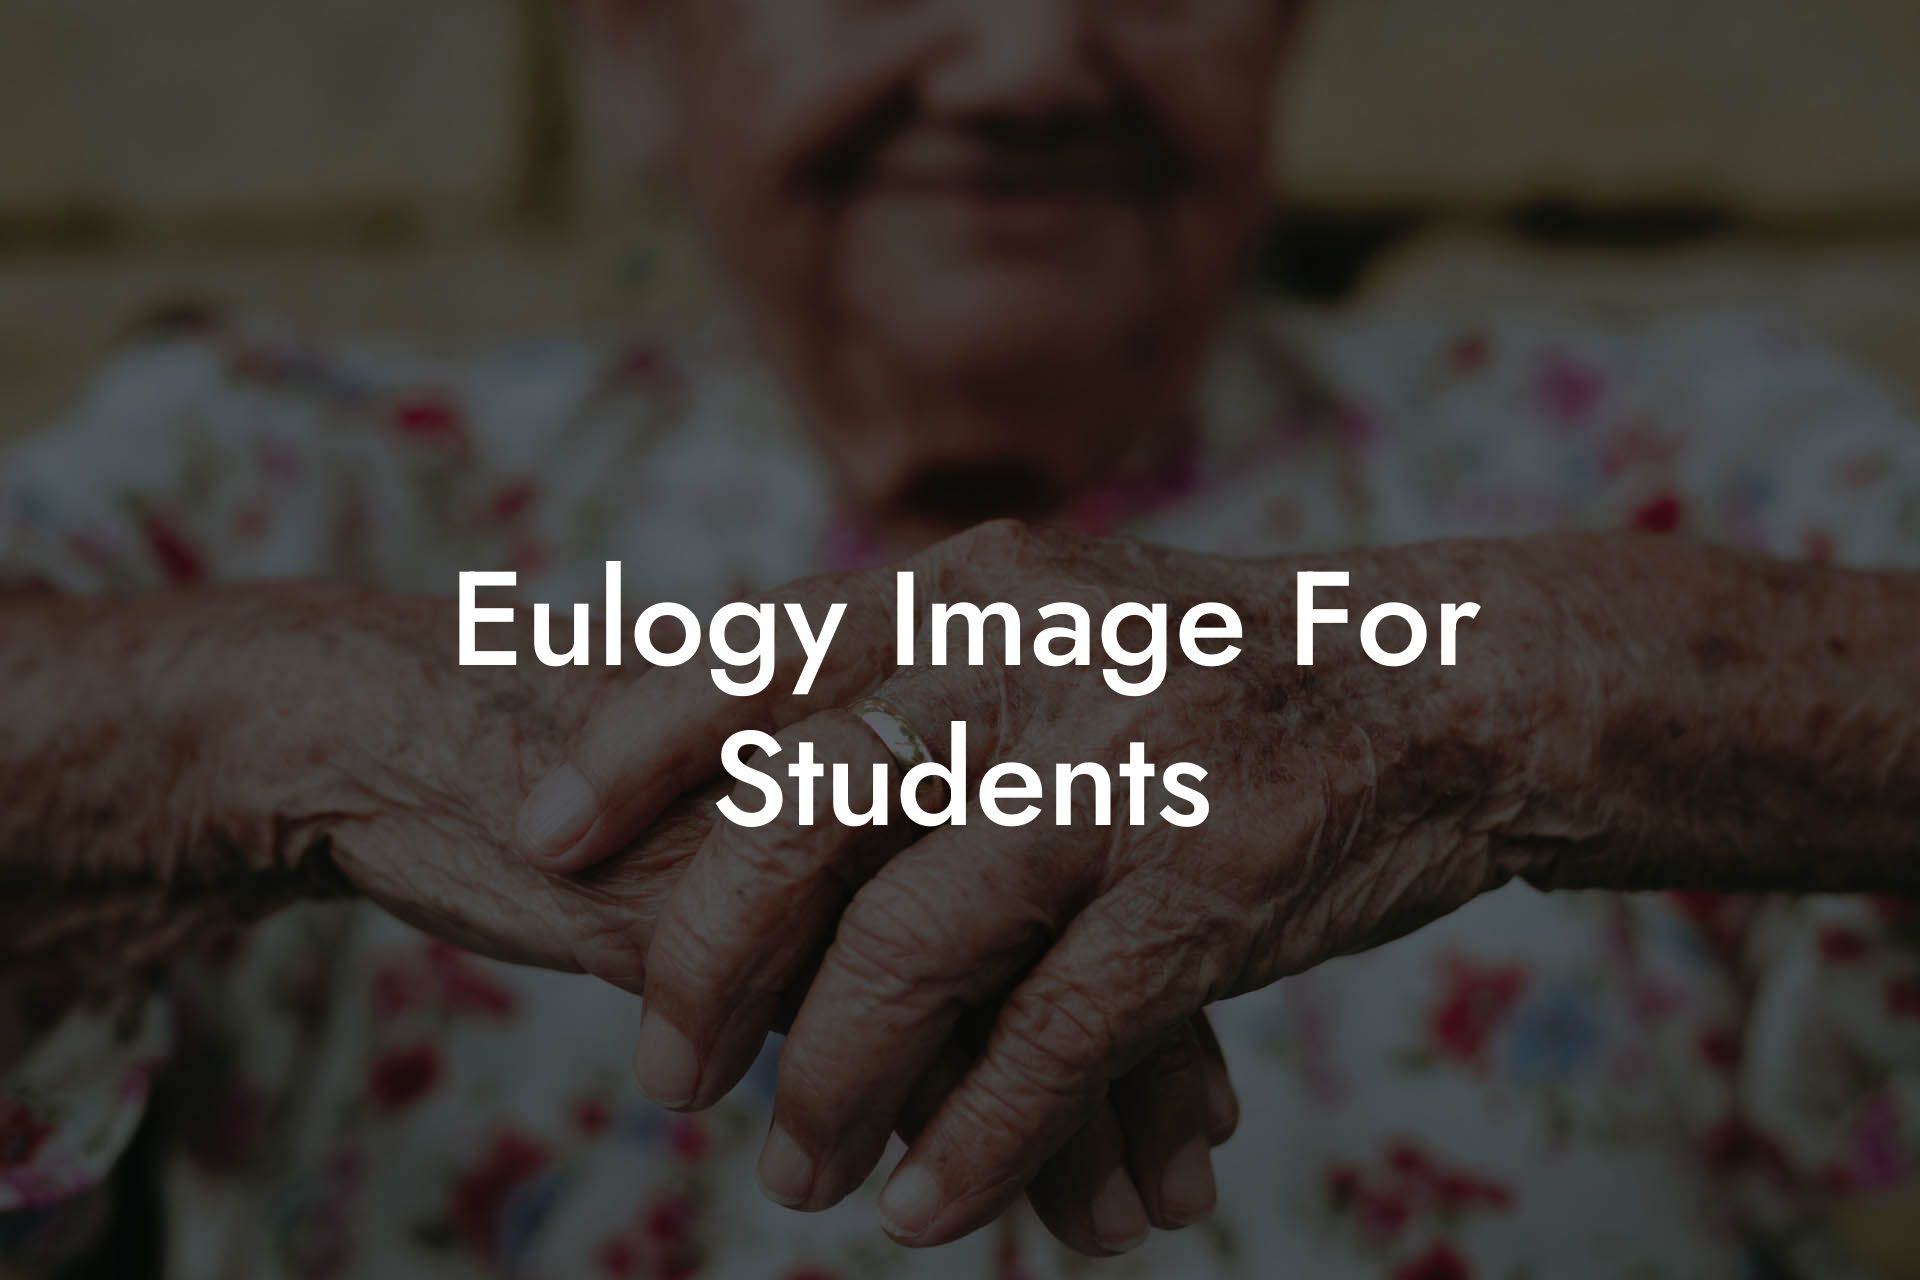 Eulogy Image For Students